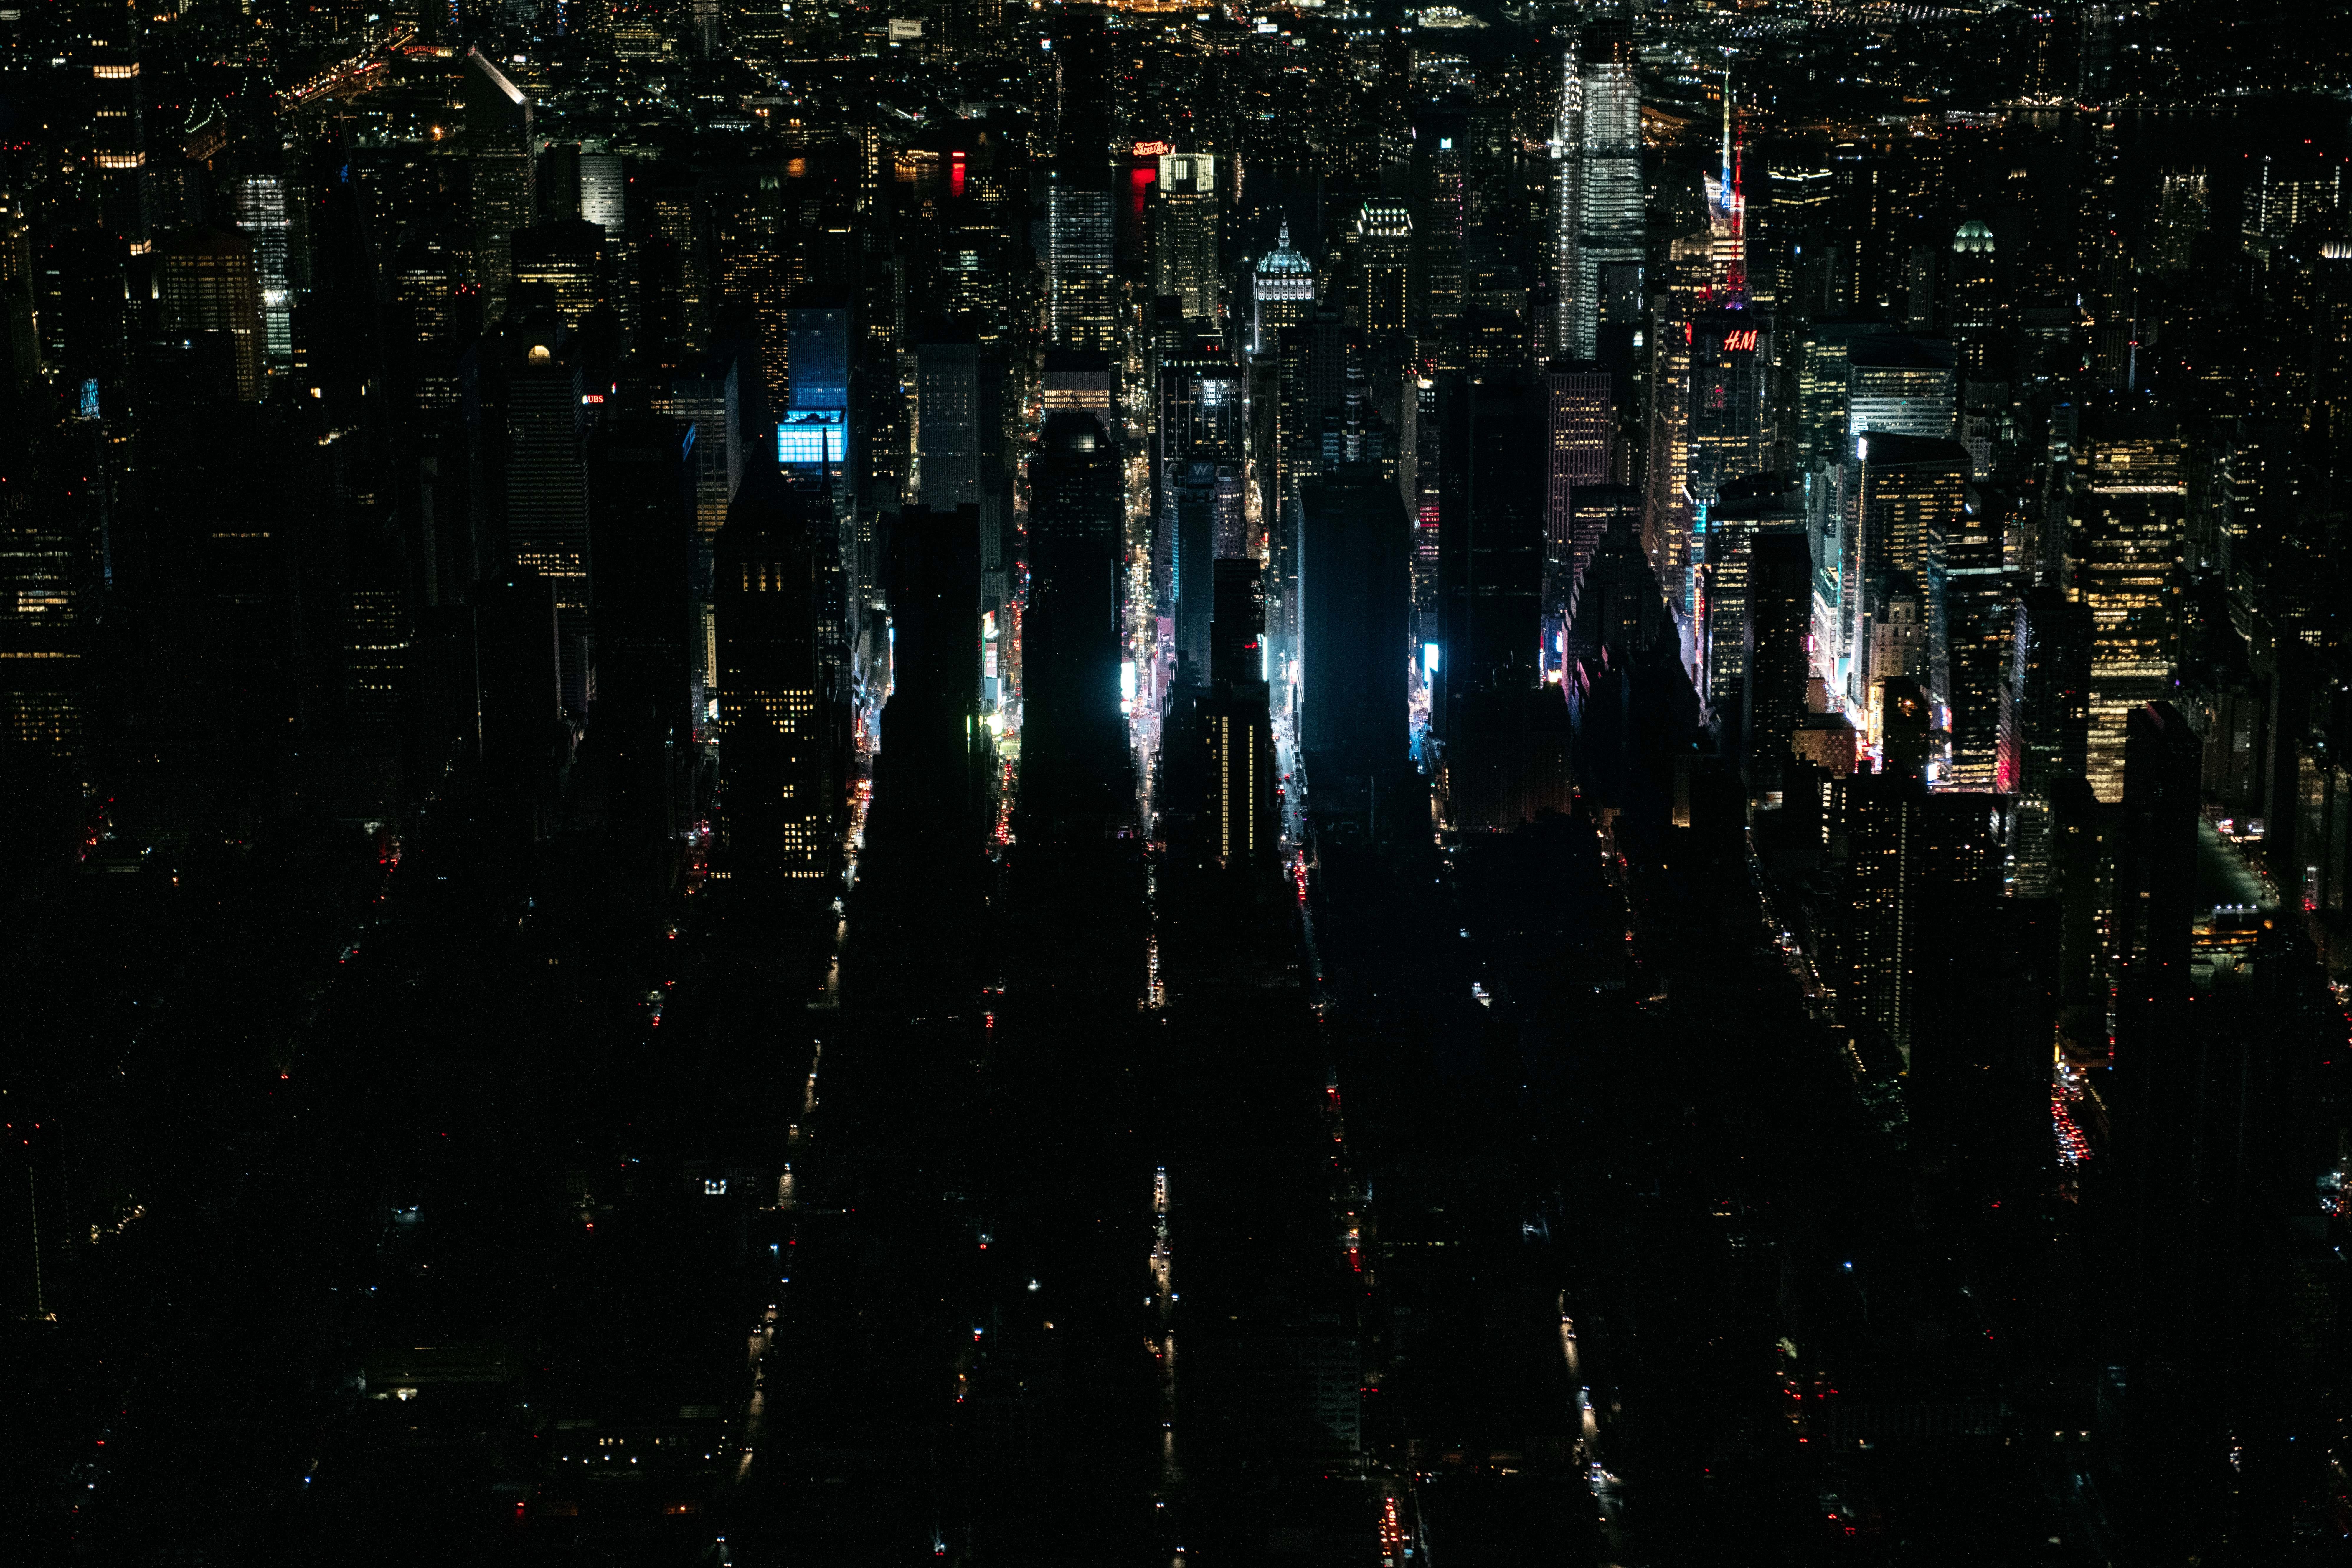 A large section of Manhattan's Upper West Side, viewed from above during the blackout.